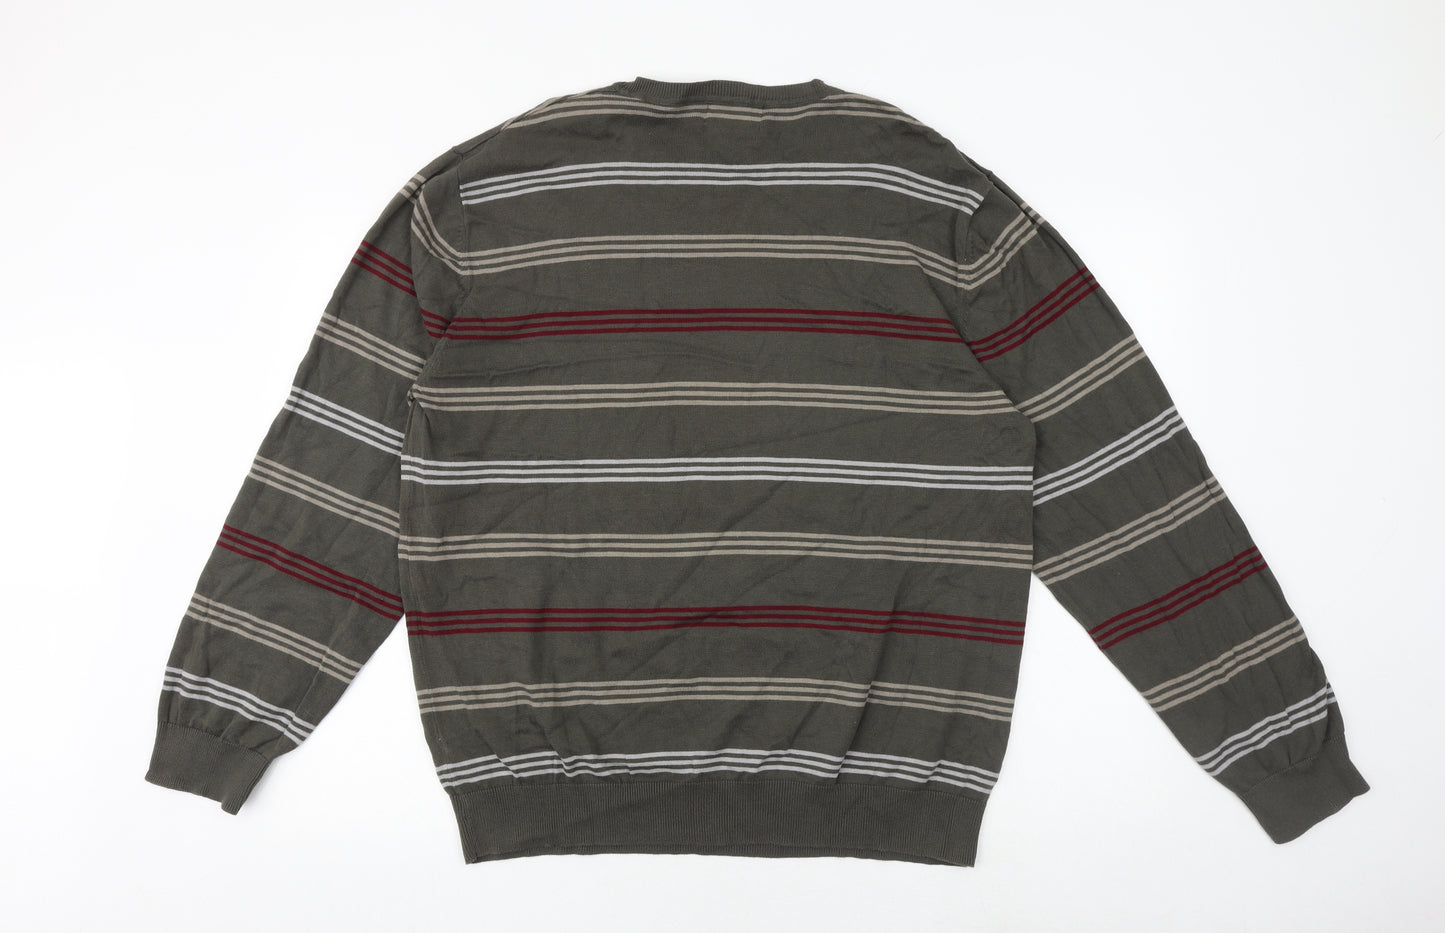 Atlantic Bay Mens Multicoloured Round Neck Striped Acrylic Pullover Jumper Size XL Long Sleeve